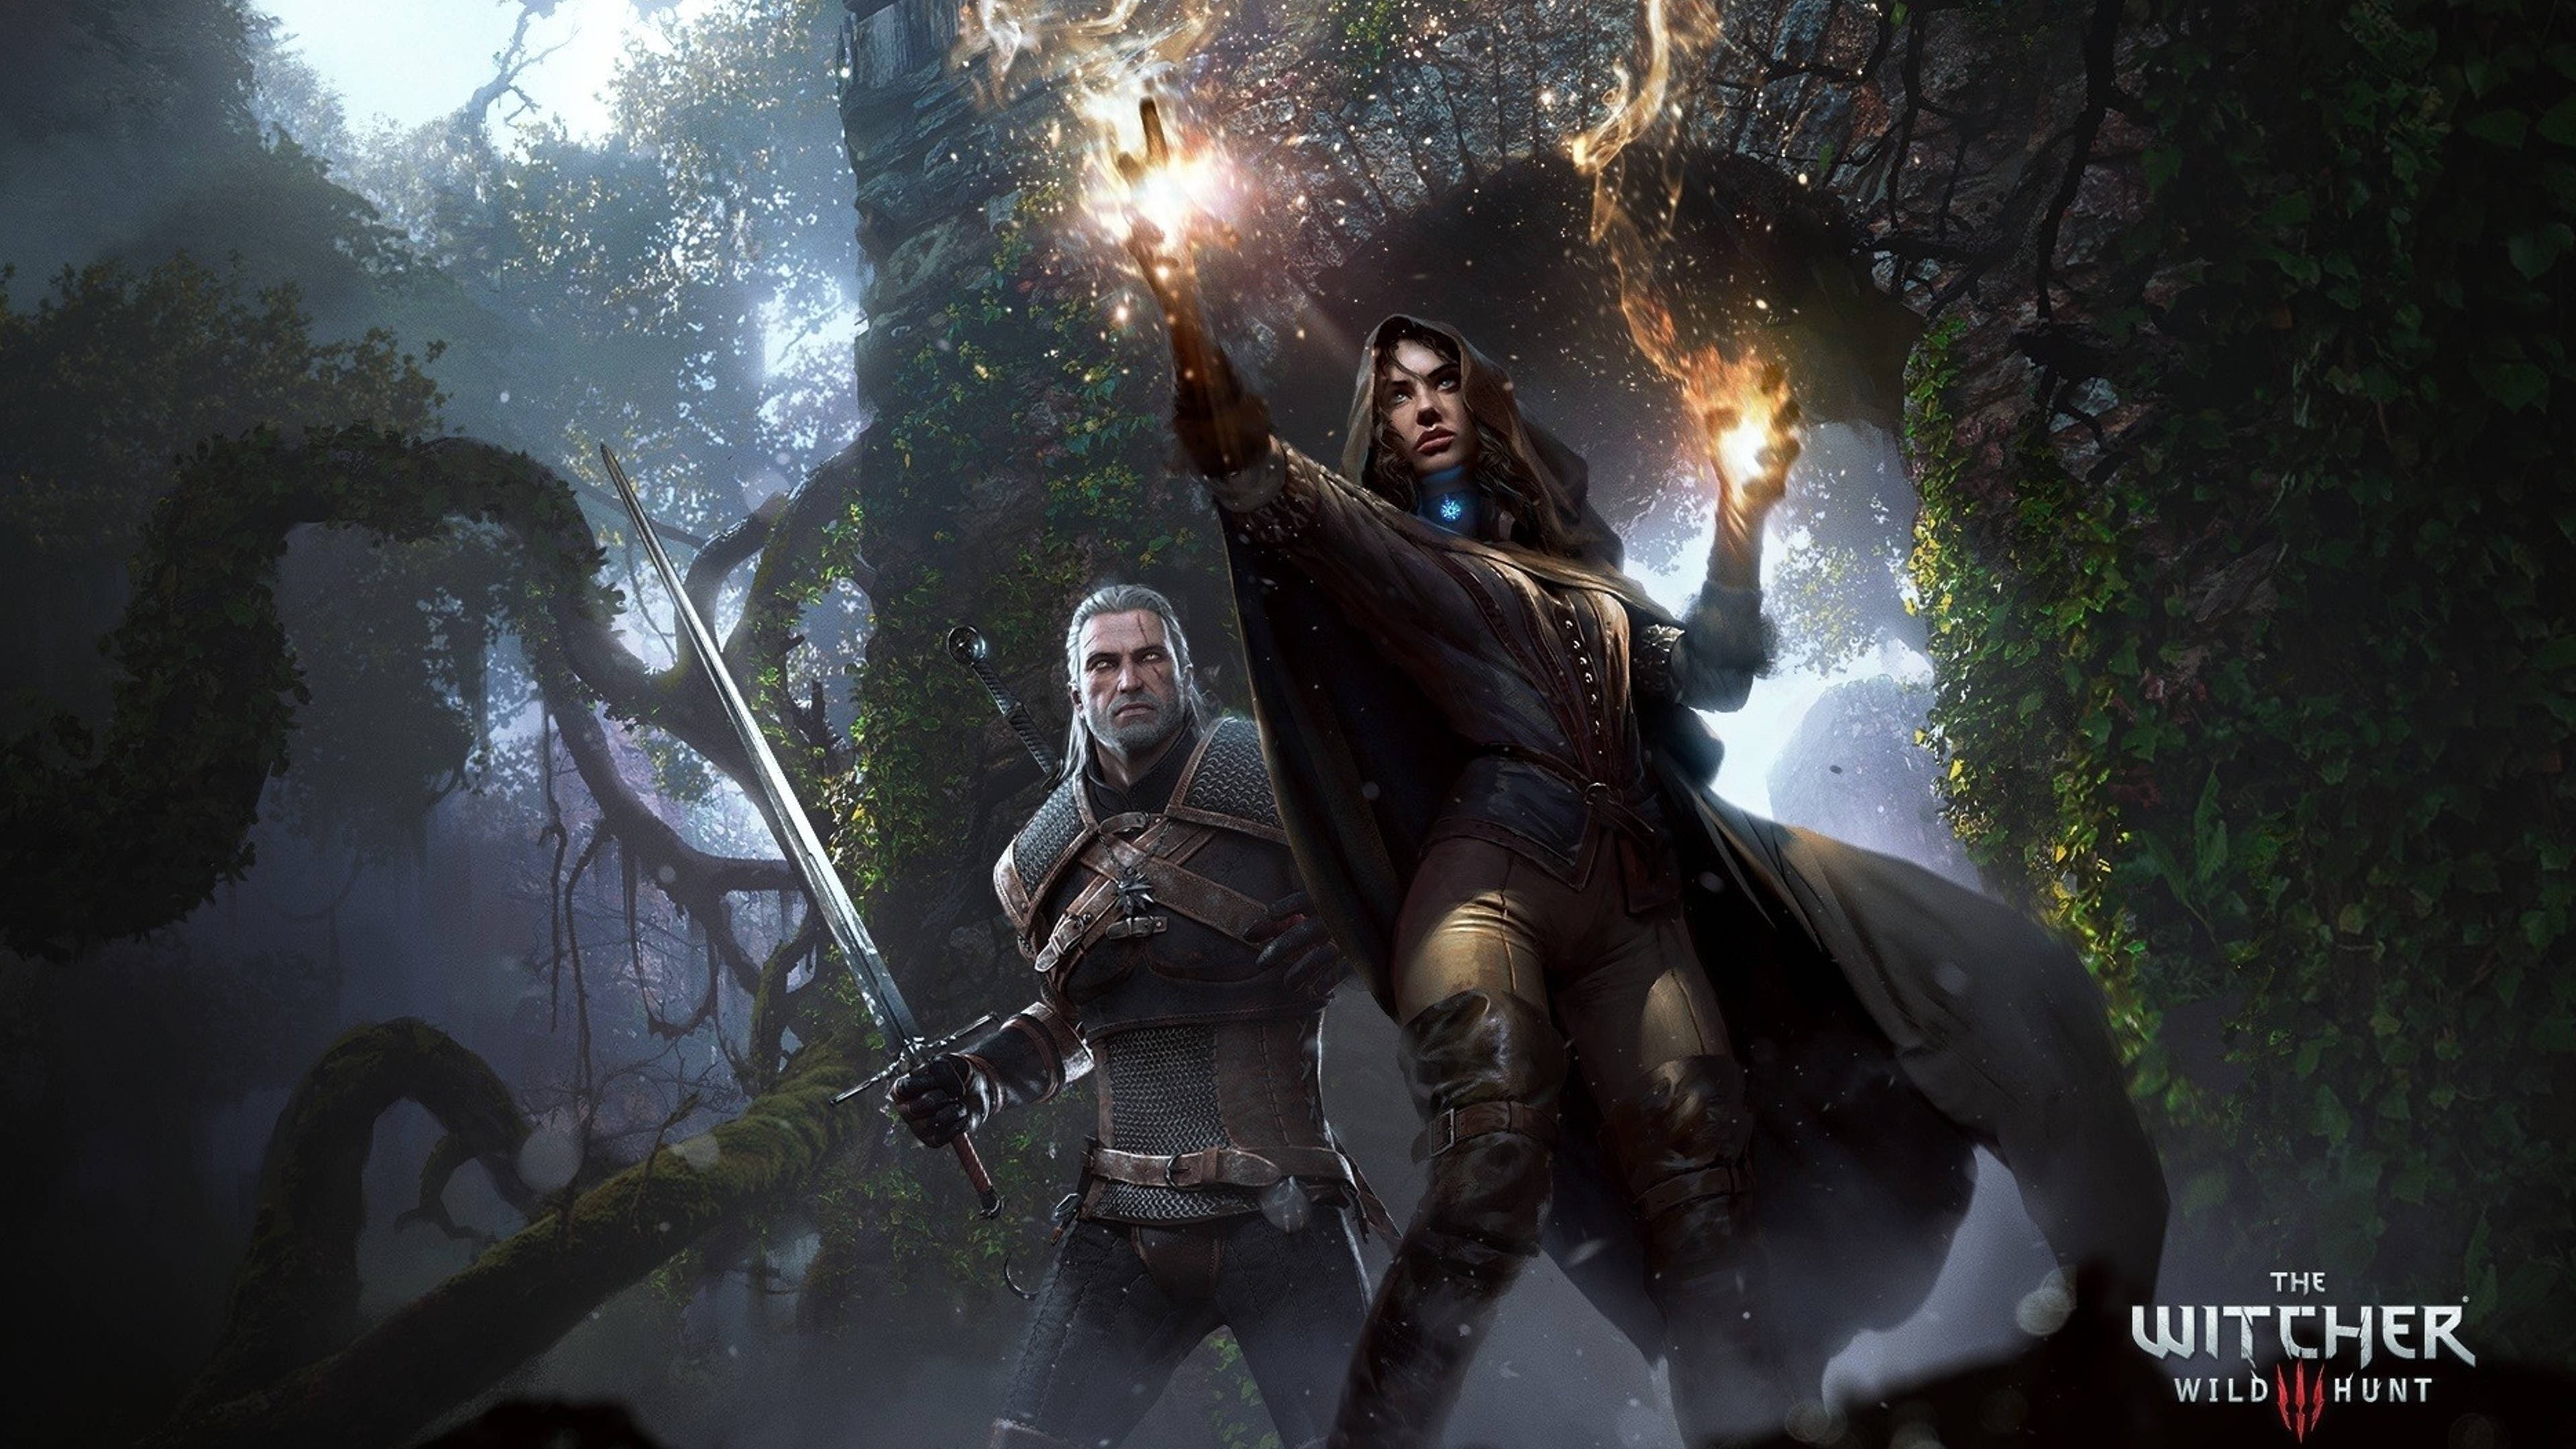 General 3840x2160 The Witcher The Witcher 3: Wild Hunt video games Geralt of Rivia RPG PC gaming video game men video game girls fantasy girl fantasy men sword magic video game art CD Projekt RED